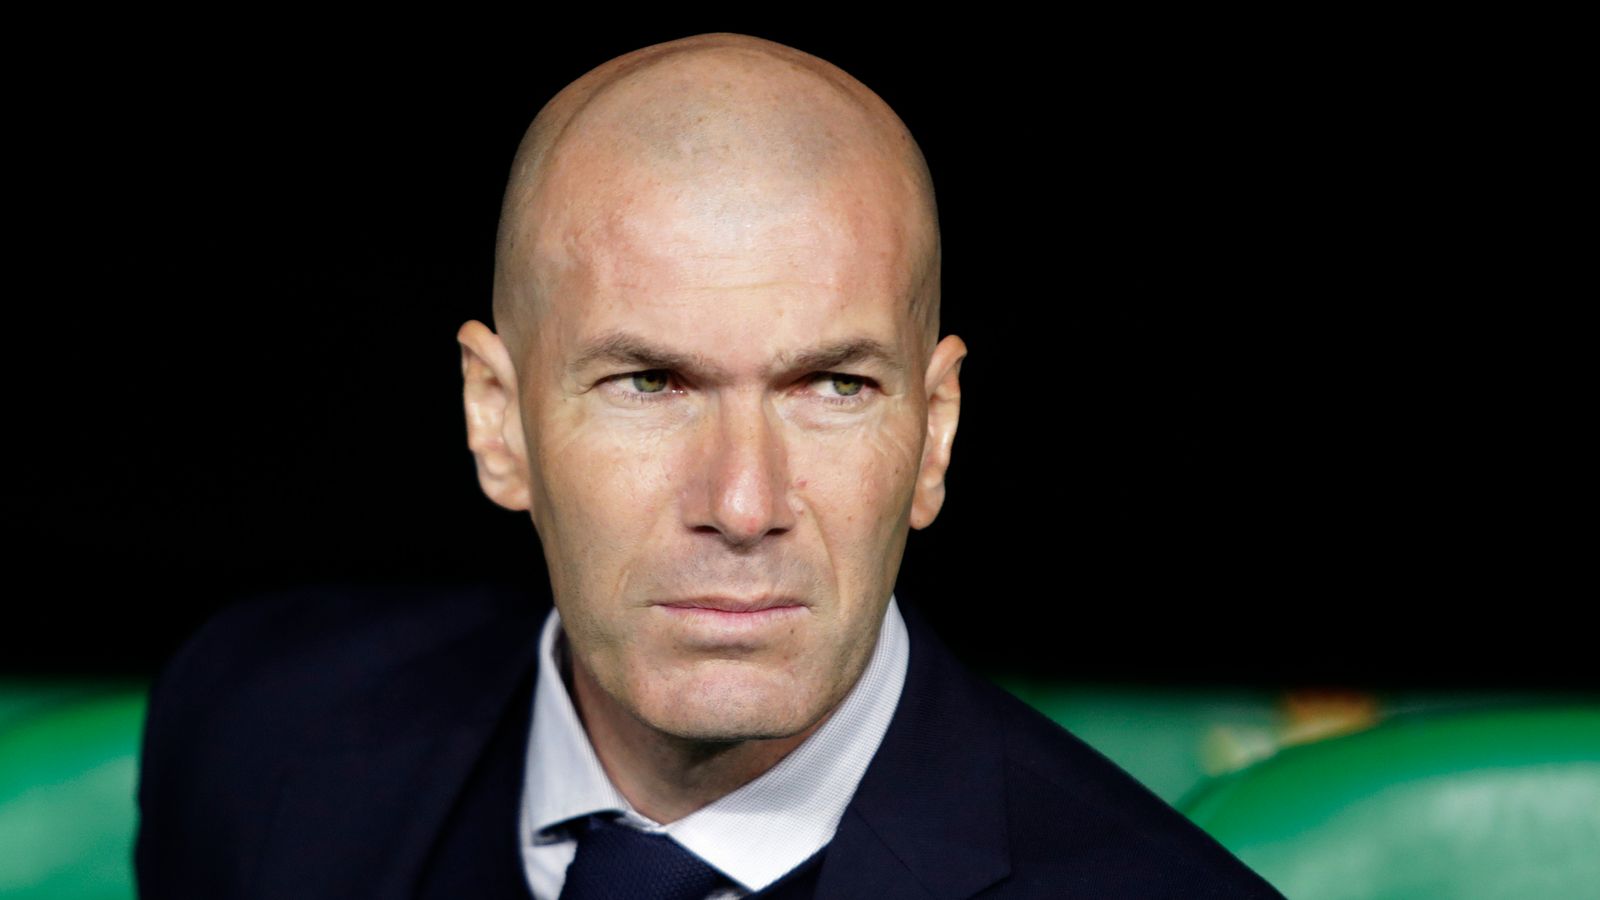 Zinedine Zidane says Real Madrid's lack of faith led to his departure |  Football News | Sky Sports